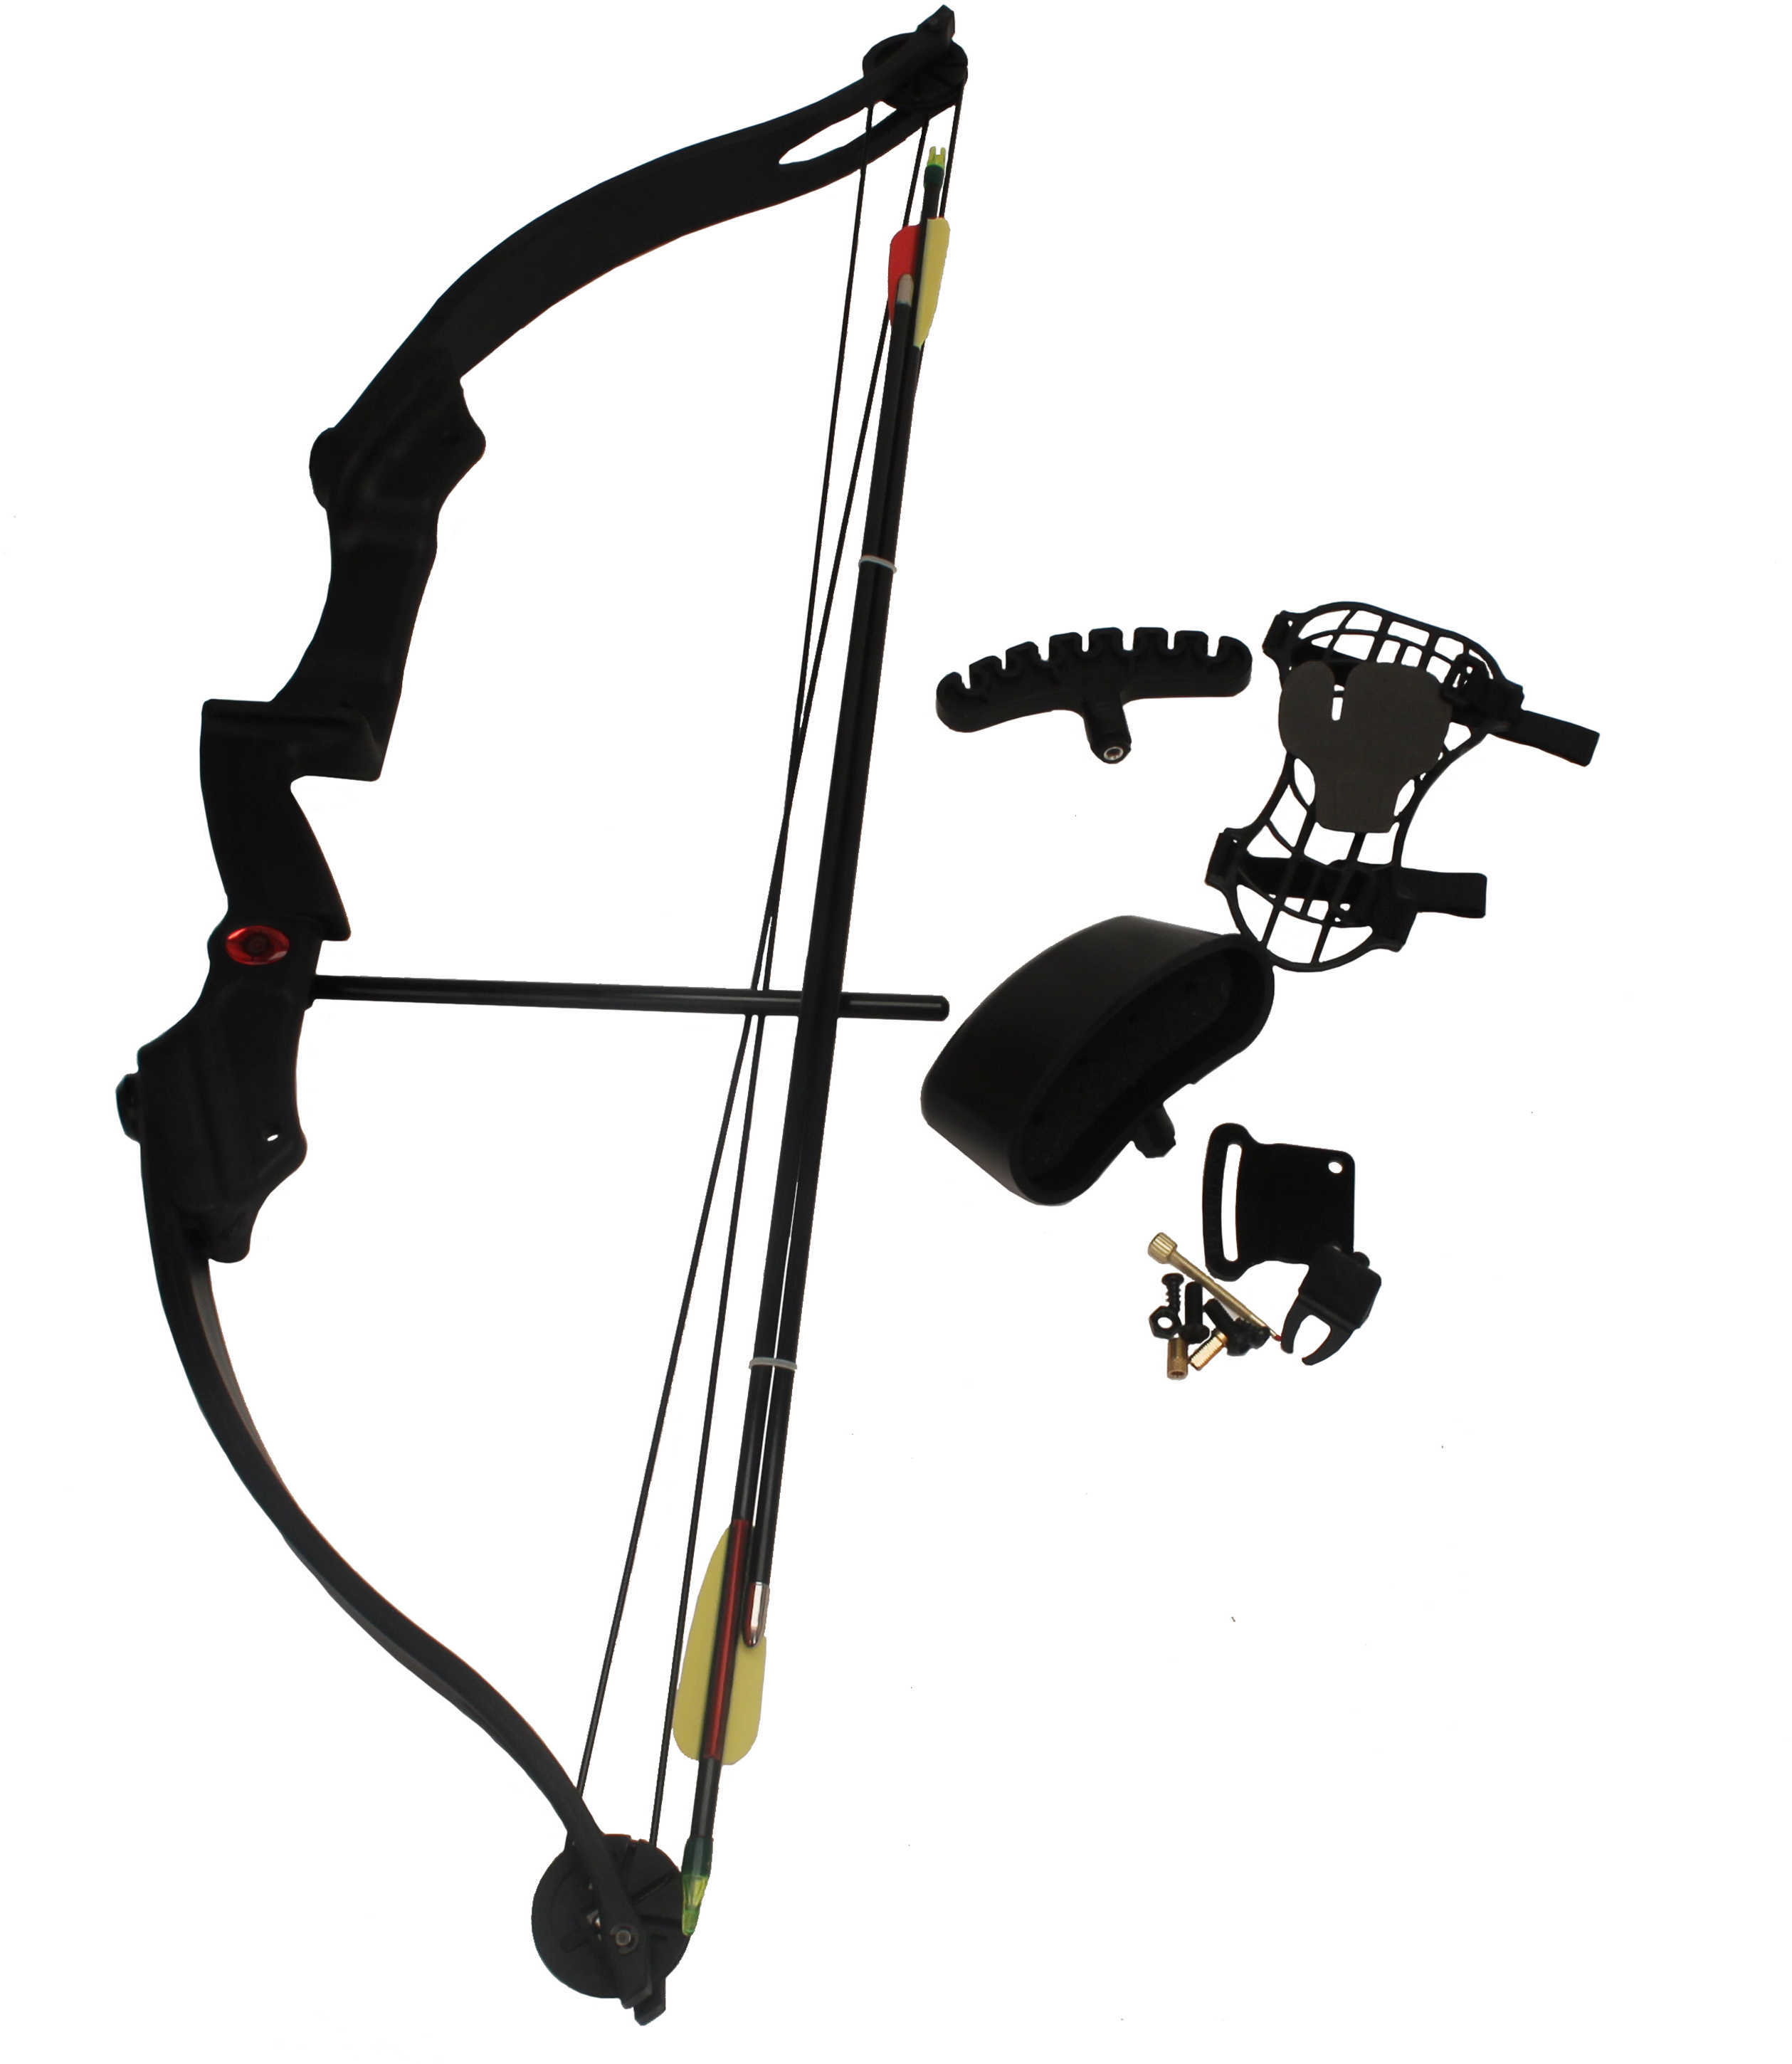 CENTERPOINT Compound Youth Bow ELKHORN Black Age 8-12